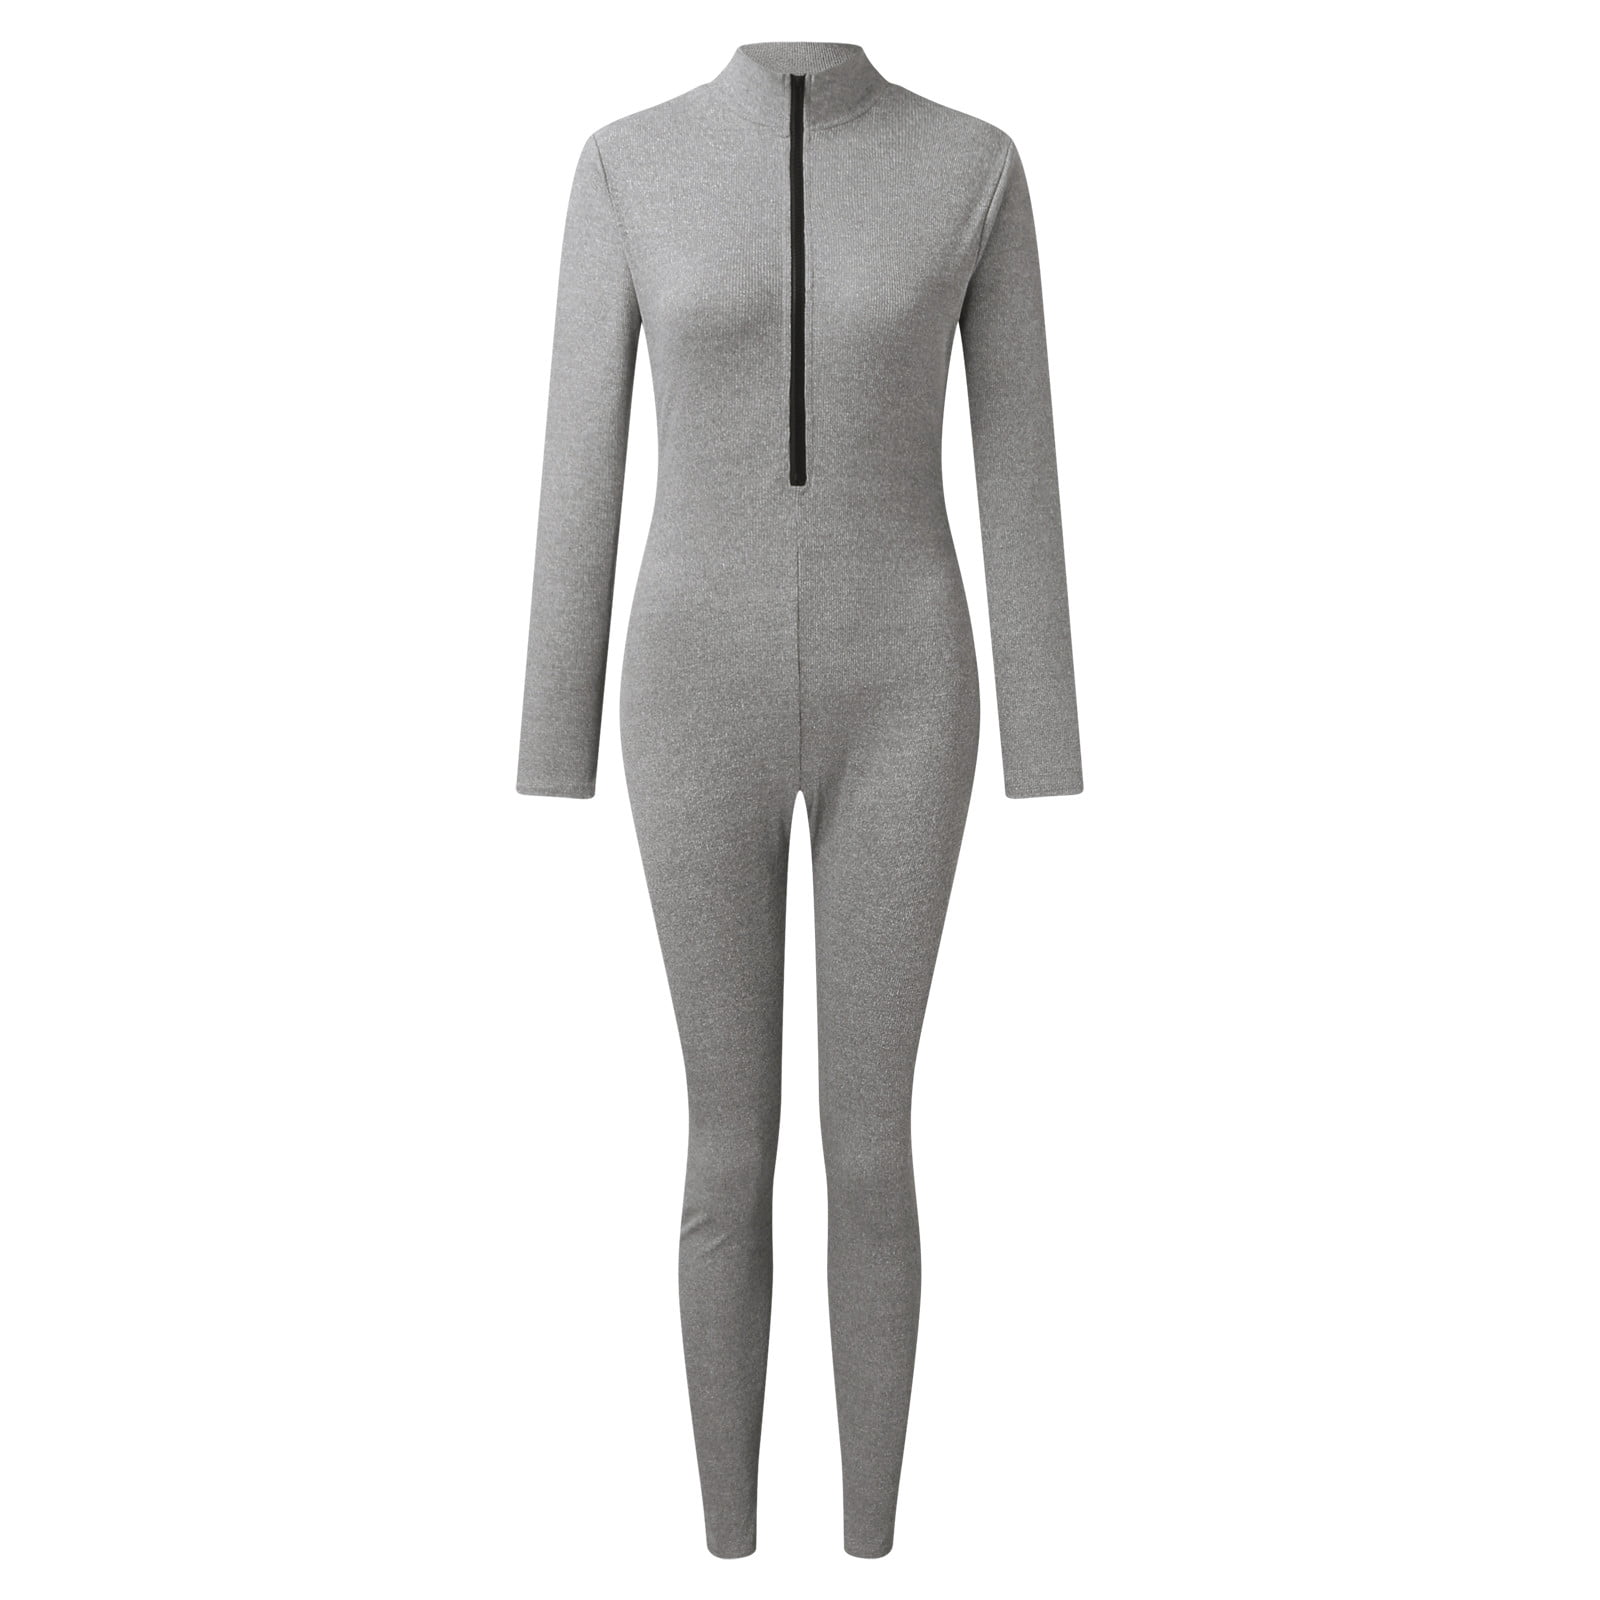 White Shapewear Bodysuit For Women Tummy Control Body Shaper Seamless  Zipper V Neck Long Sleeve Rompers Catsuit Sport Jumpsuits For Women Casual